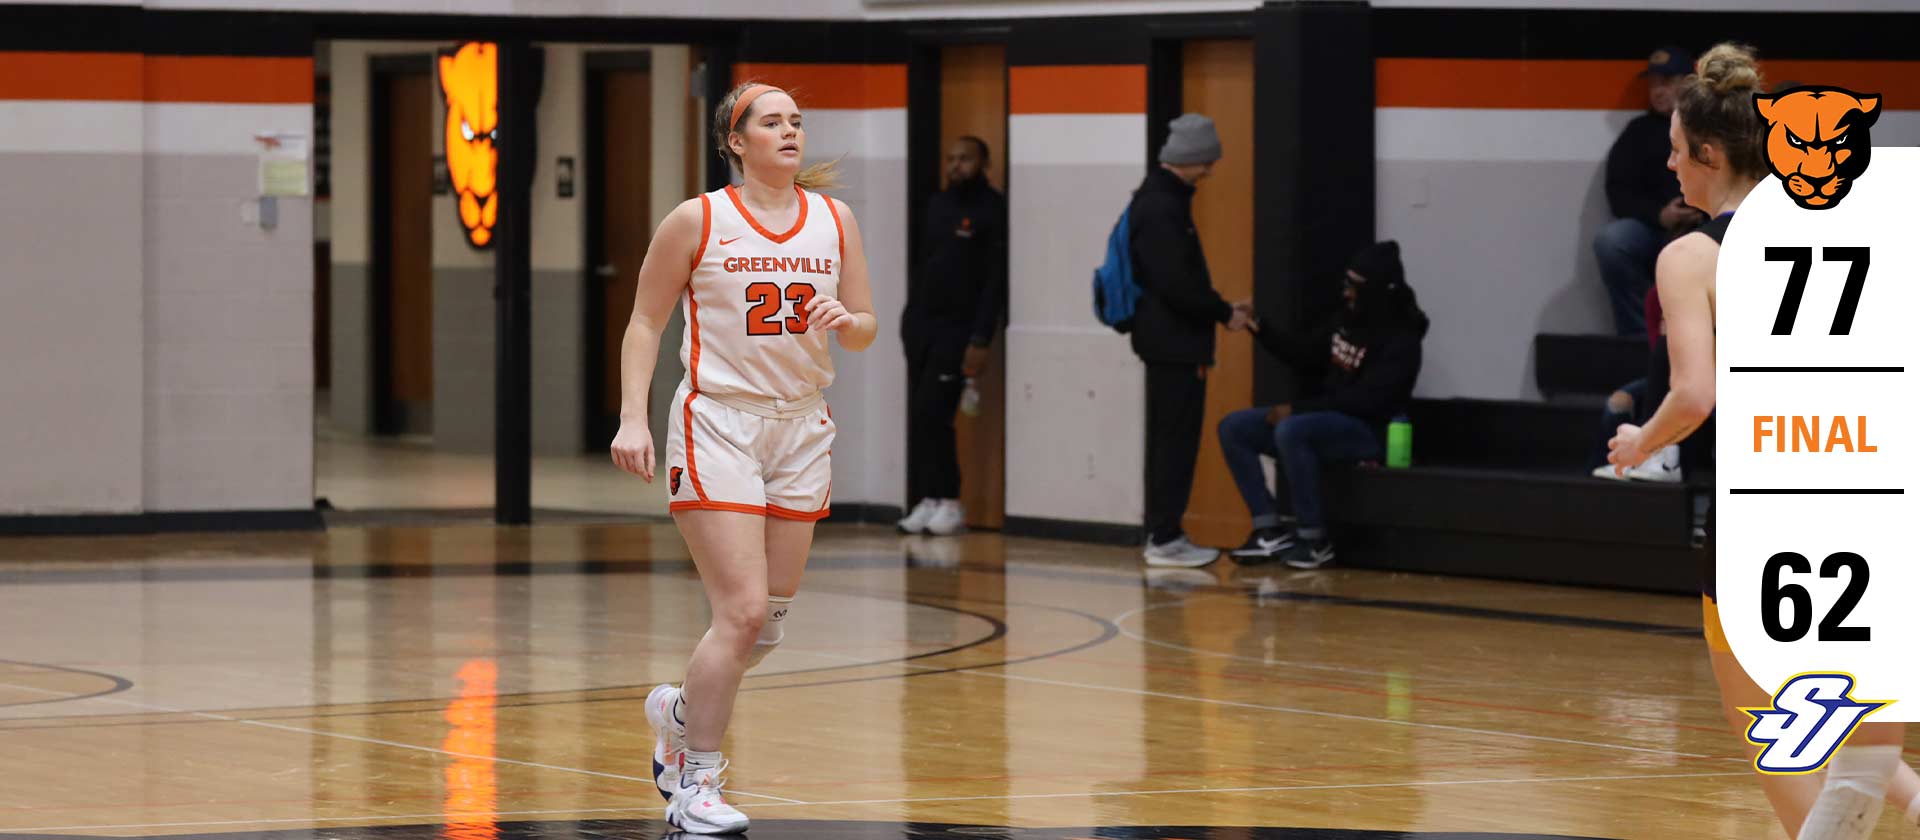 Women's basketball takes 77-62 win at Spalding